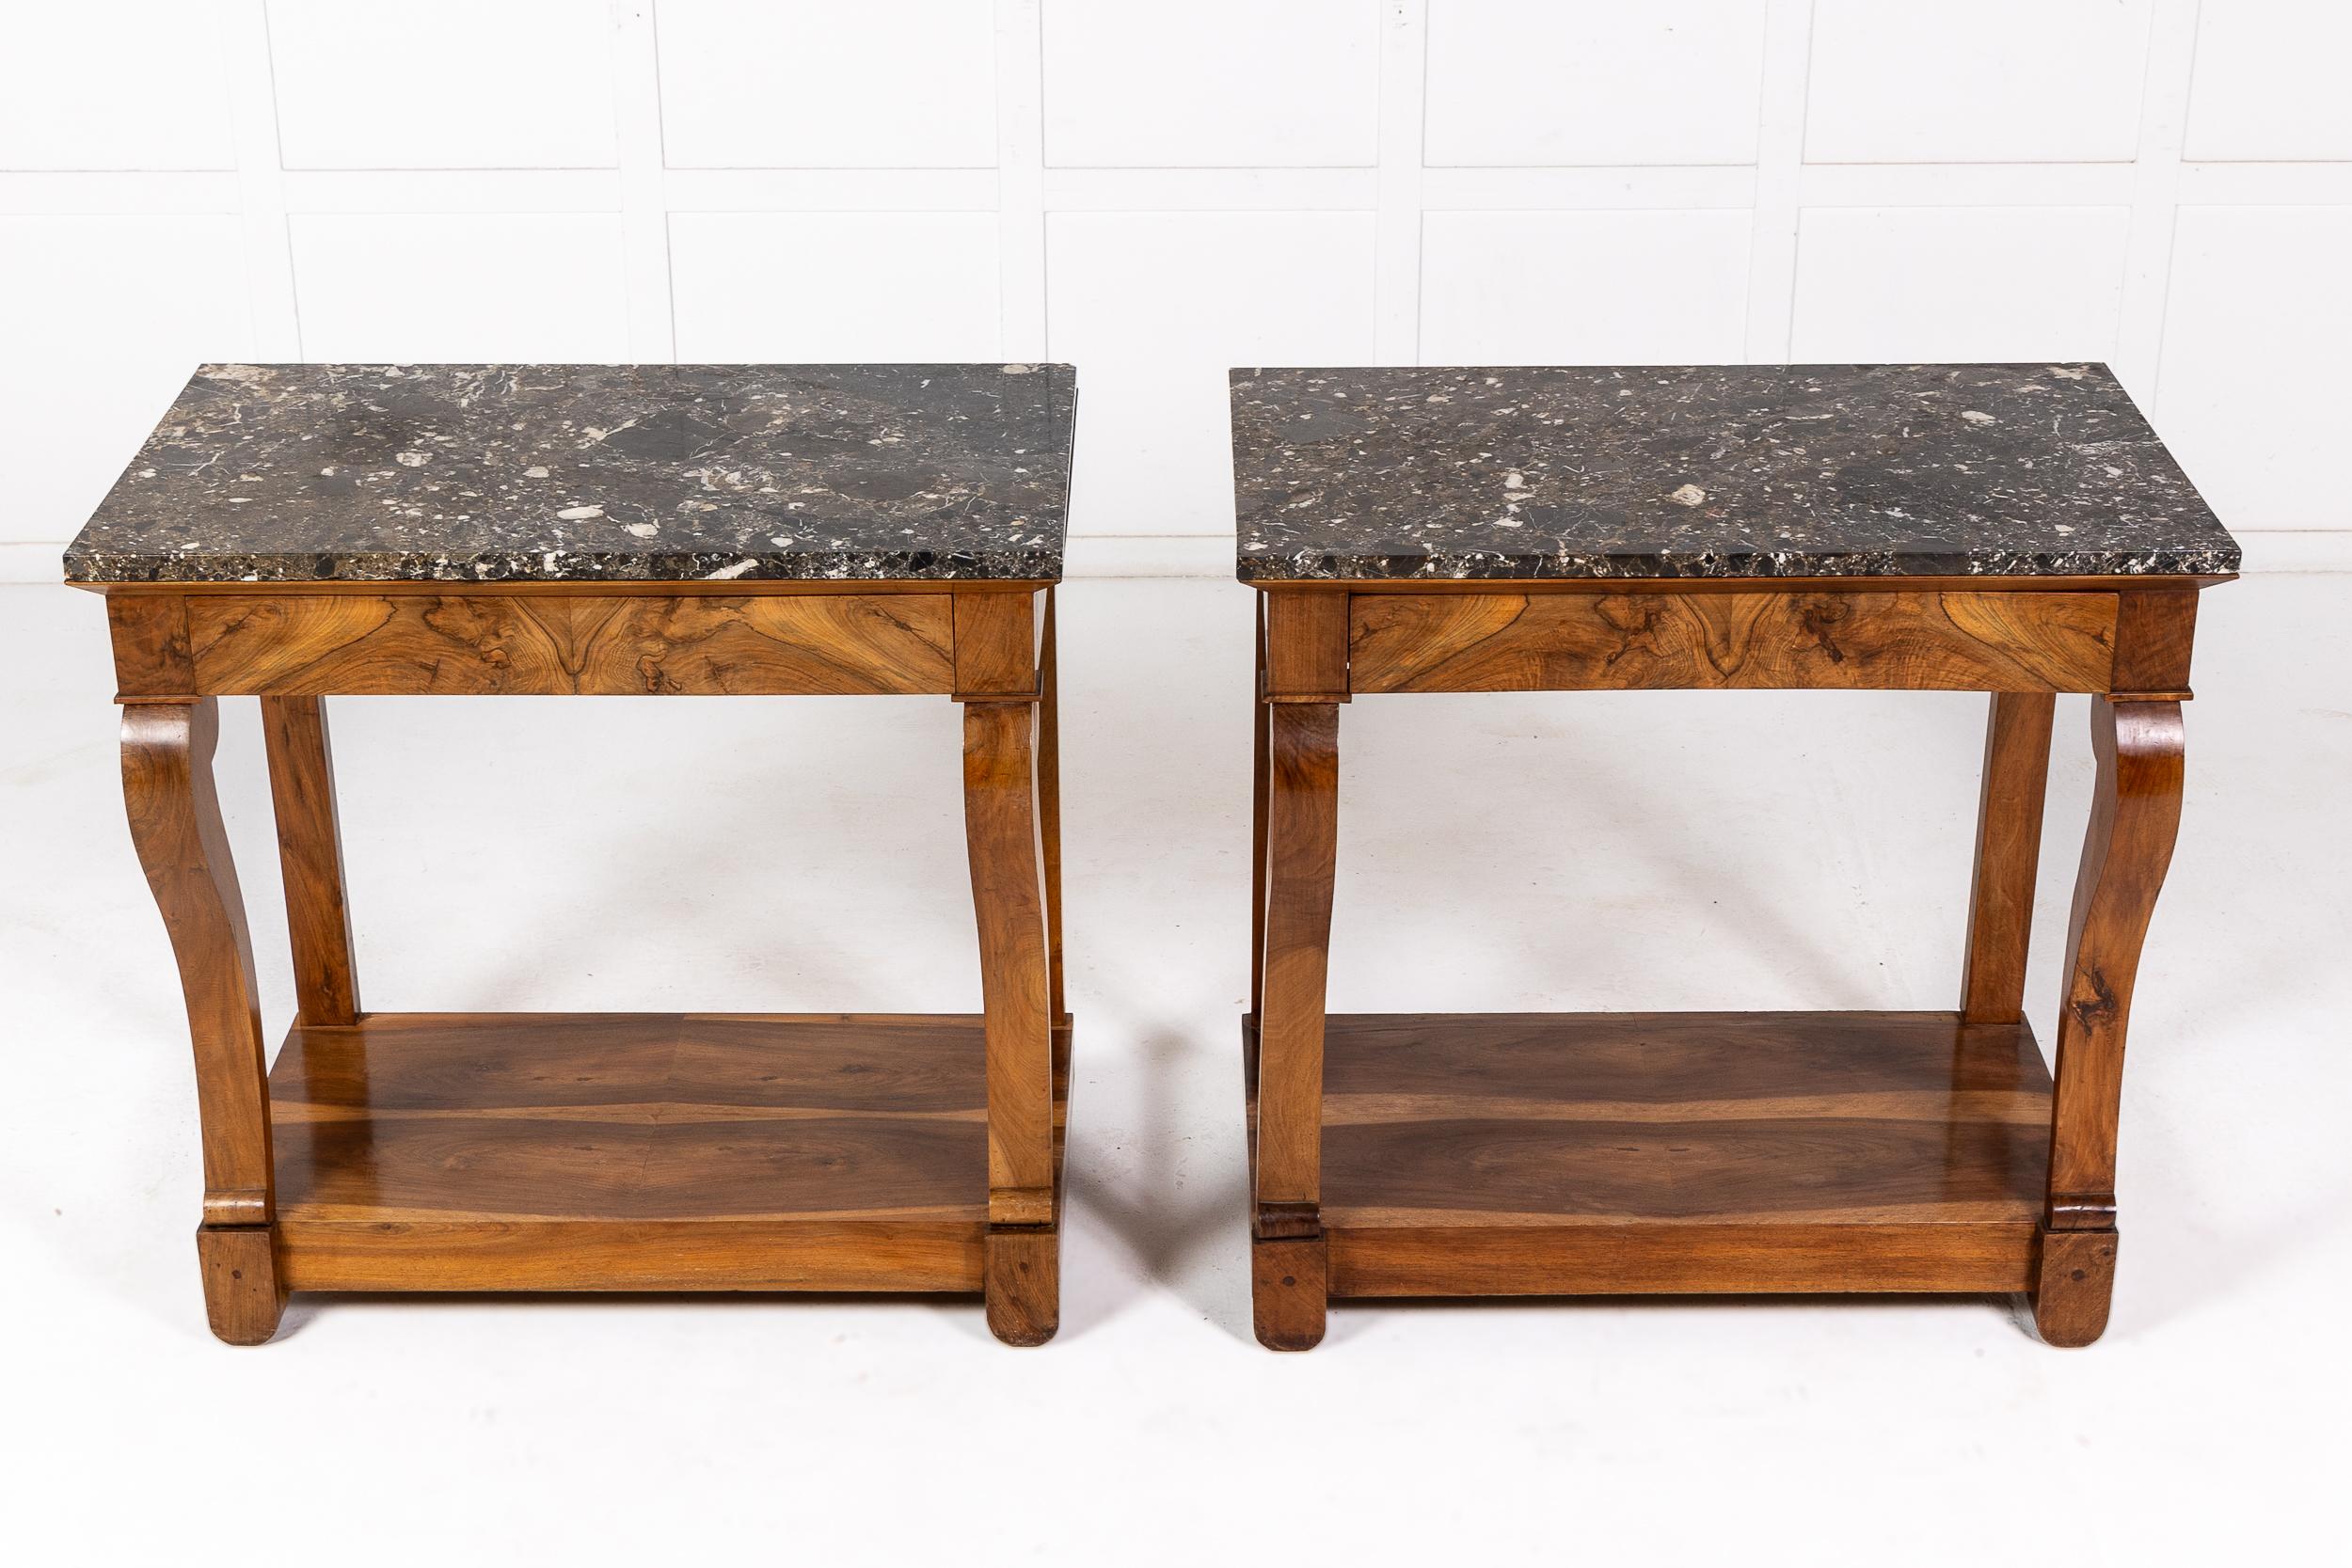 A Pair of 19th Century French Walnut Console Tables with Original Marble Tops.

The tables executed in highly figured walnut with sap wood veneers chosen for the bases to bring out the pattern in the timber. The original marble tops of lovely figure